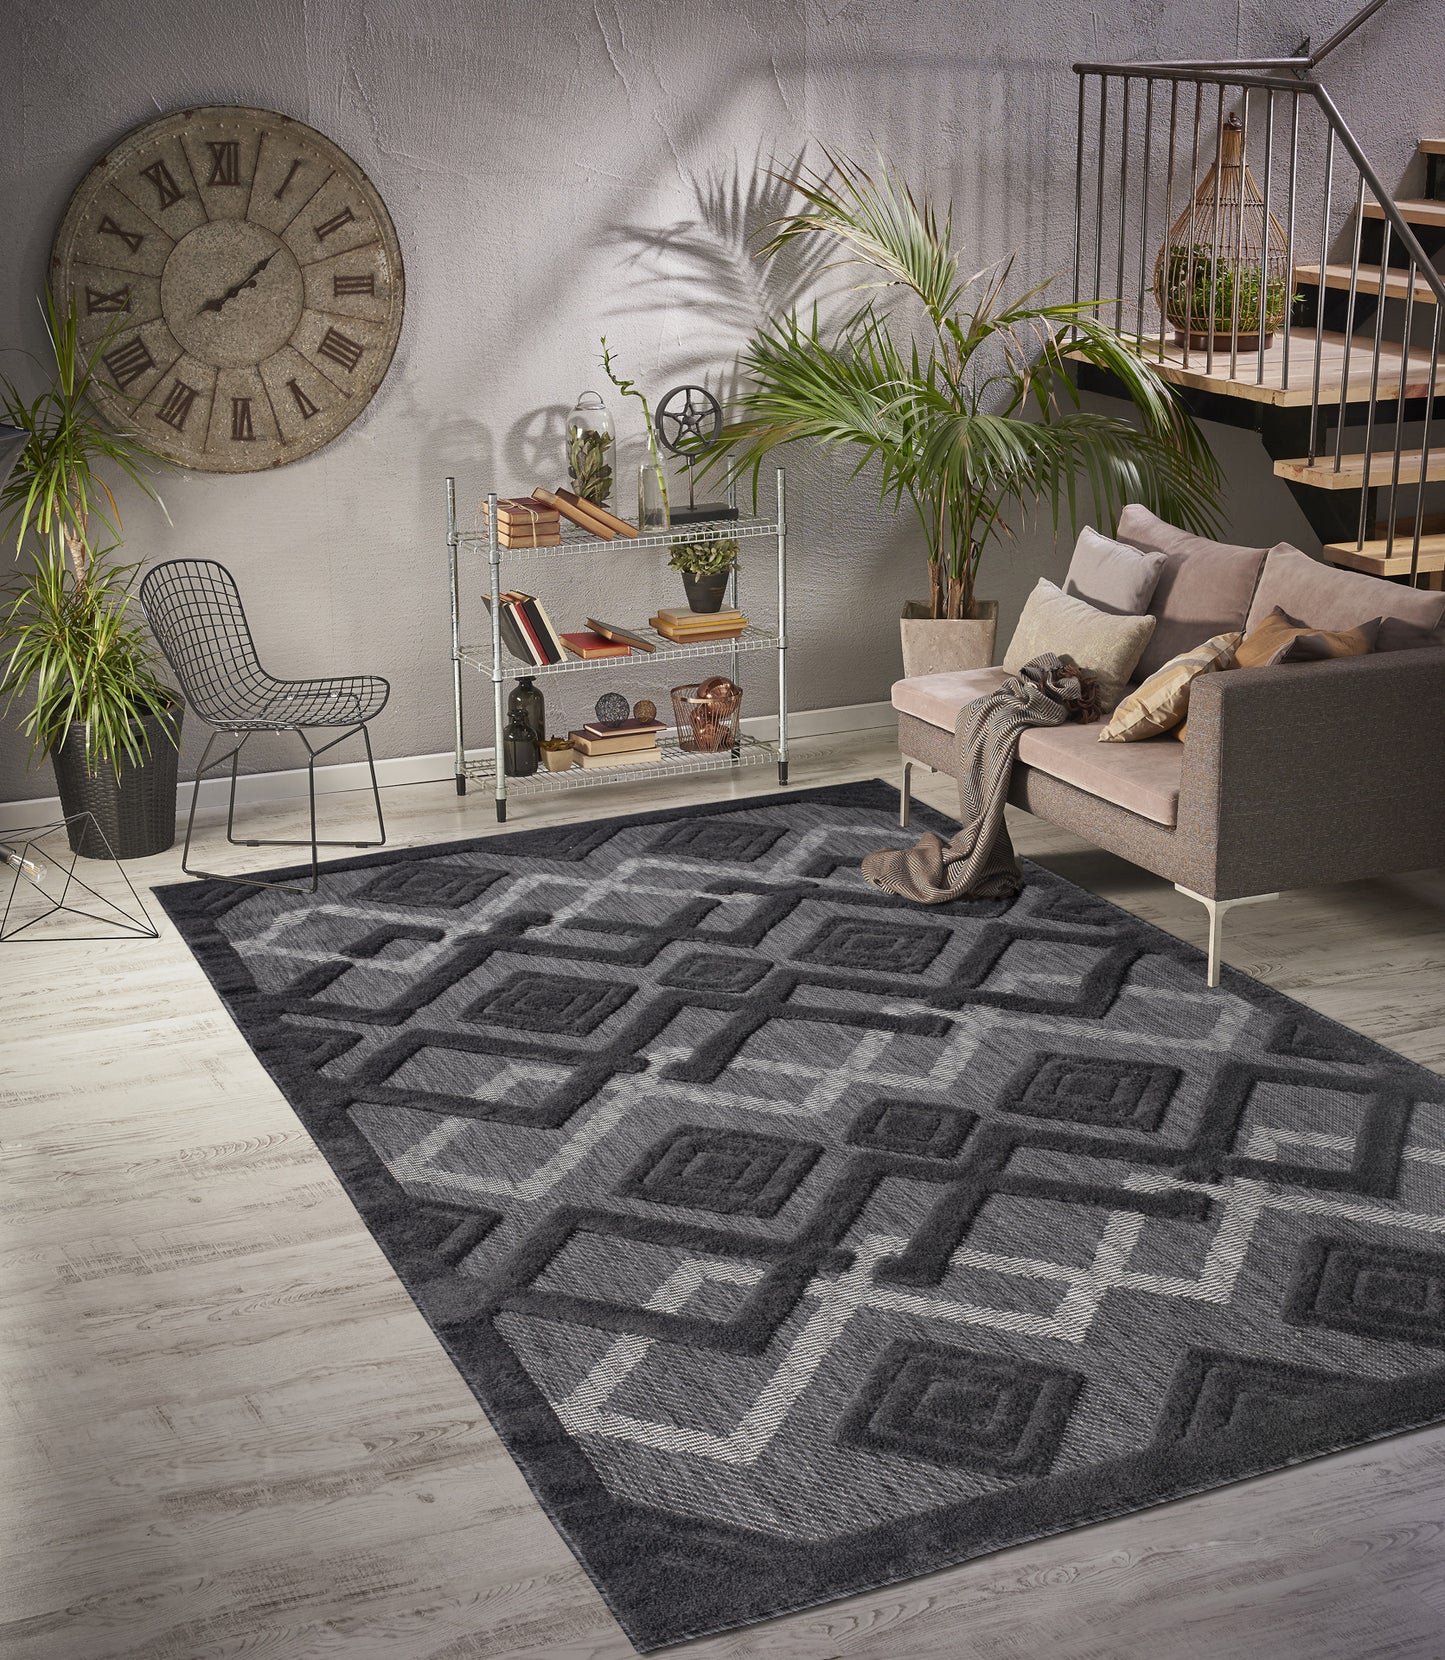 geometric modern minimalist contemporary outdoor indoor area rug carpet for patio porch dining area balcony living room bedroom 6x8, 6x9 ft Living Room, Bedroom, Dining Area, Kitchen Carpet